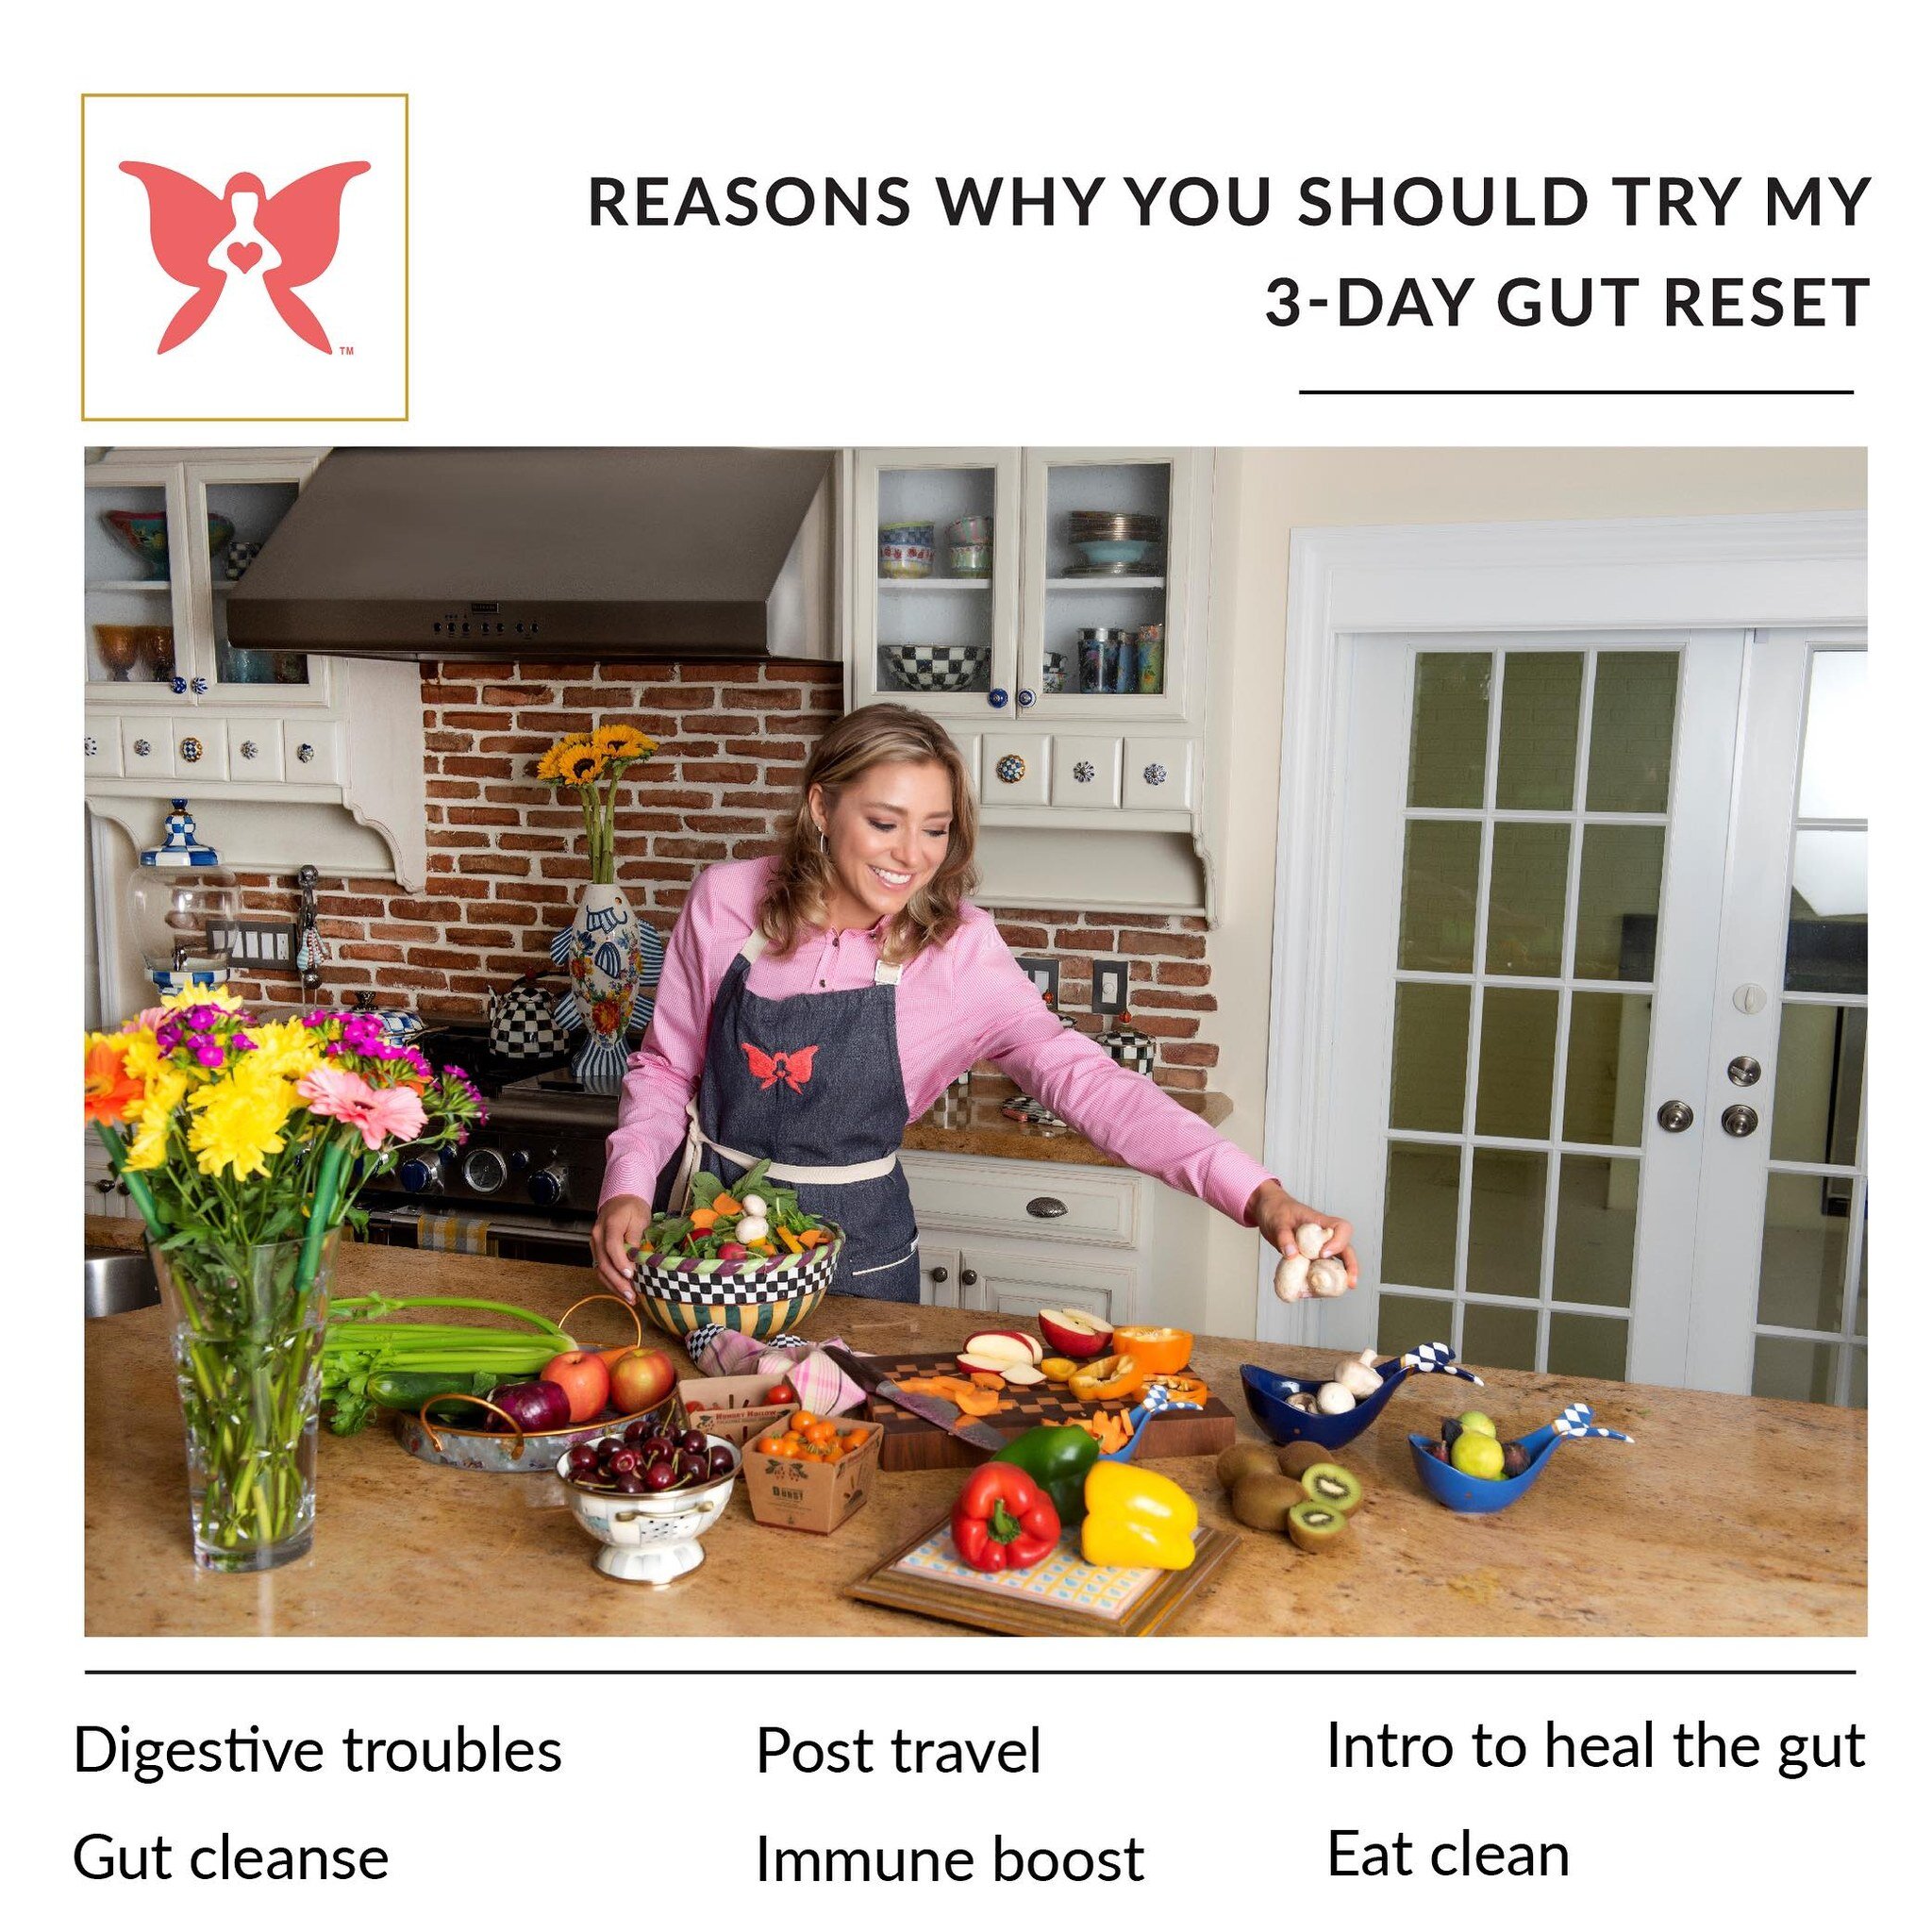 I recently launched my FREE 3-Day Gut Reset with @zenwisehealth sharing my plan for eating foods that help support the gut for three days. The diet includes cooked foods, blended soups, broths, smoothies and fresh juices, all foods that are much easi